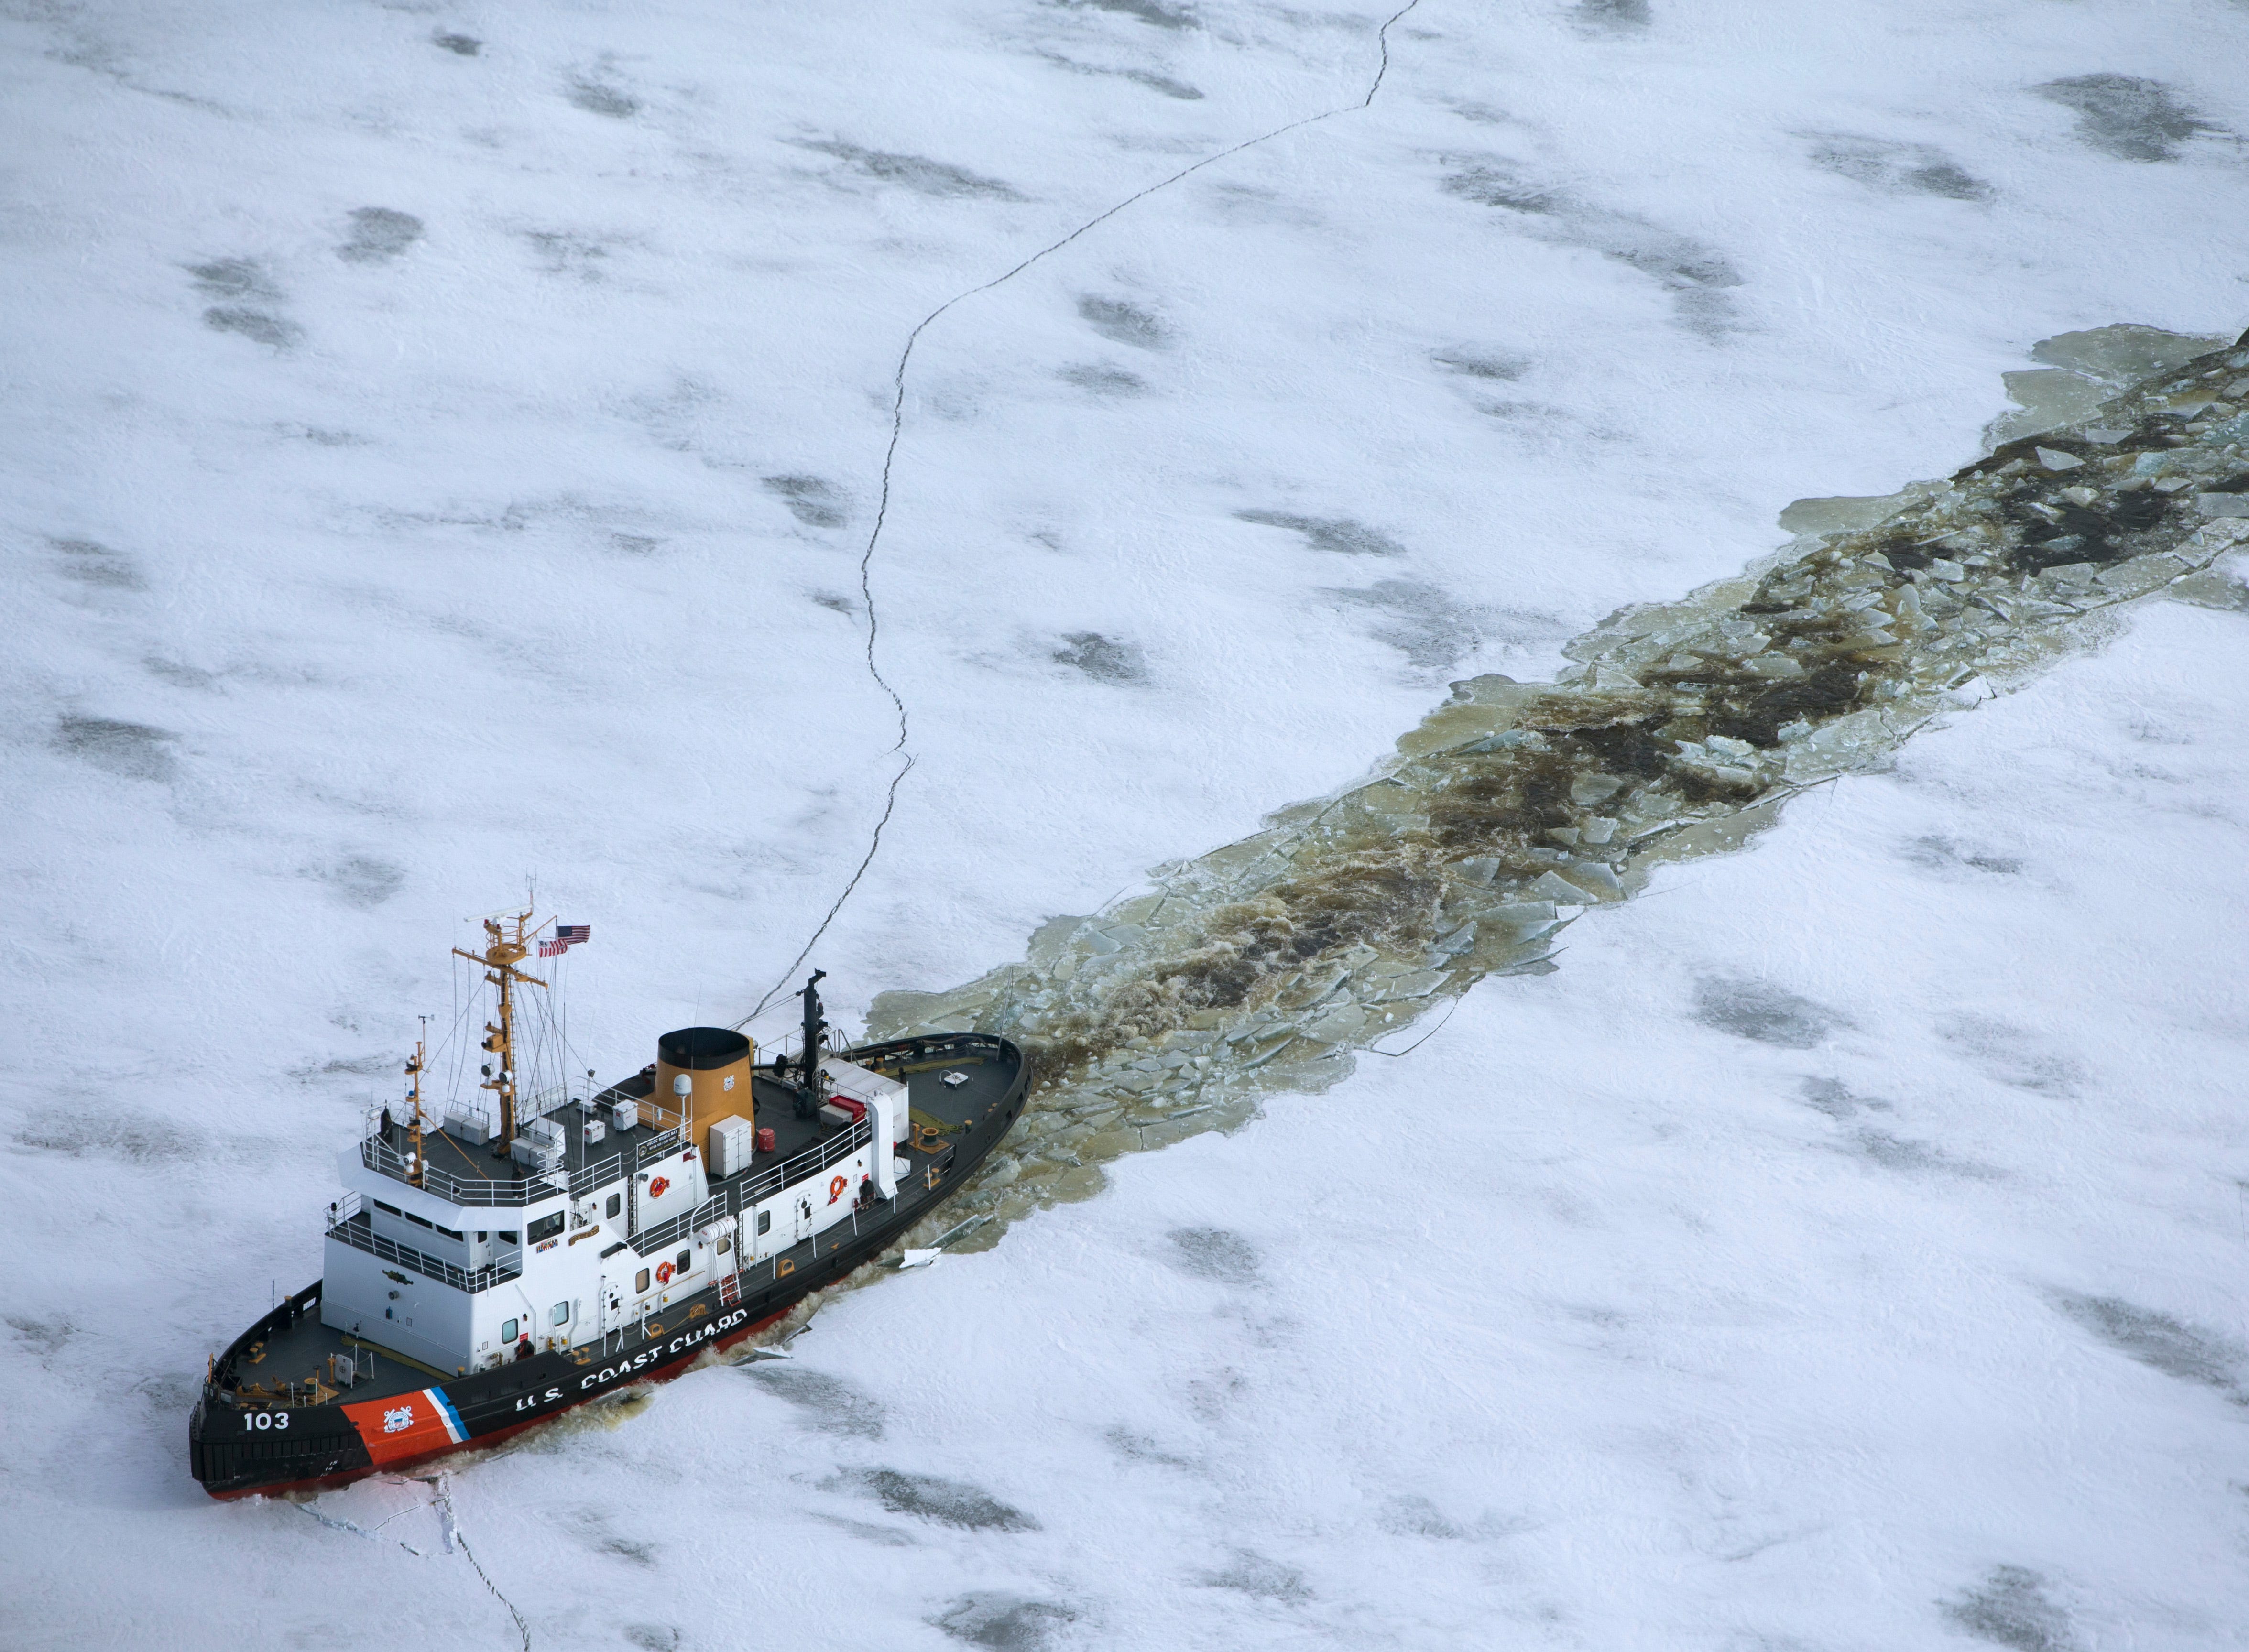 The U.S. Coast Guard cutter Mobile Bay breaks ice in Green Bay east of Marinette, Wis. According the Coast Guard spokesman Mark Gill, the average ice thickness is 24-36 inches, but they are finding spots as thick as 48-inches. It's part of the annual